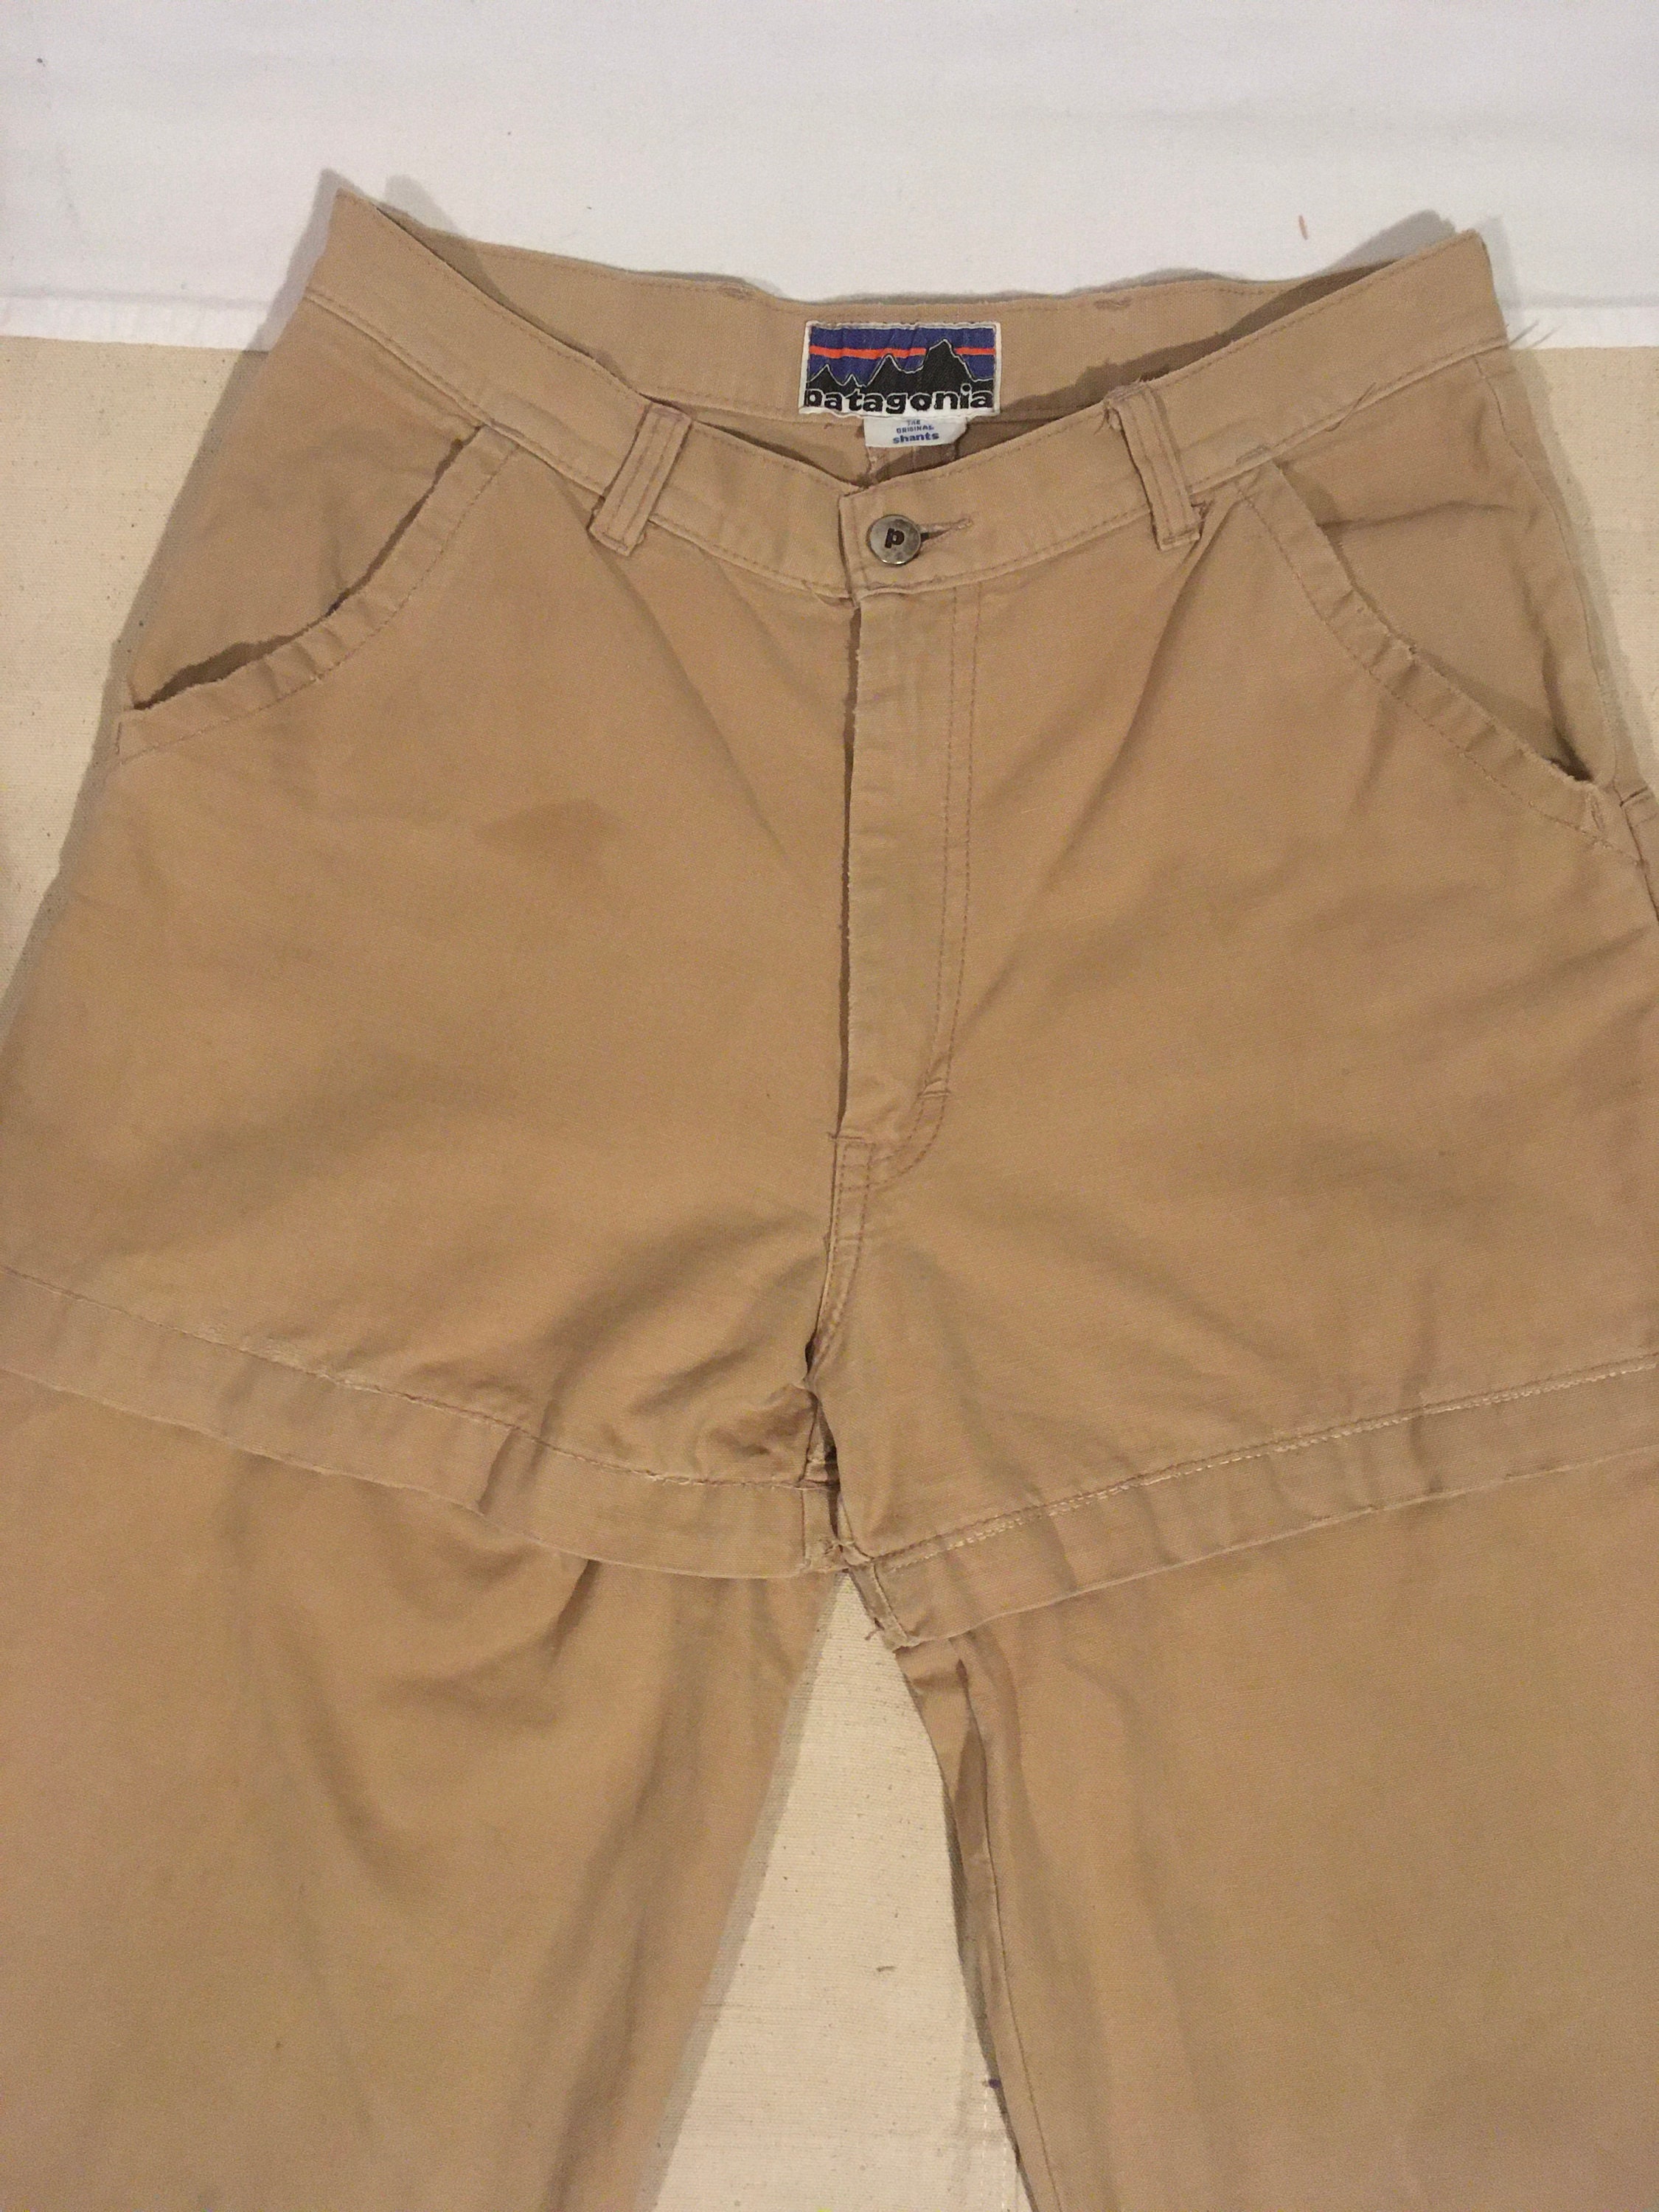 Vintage 70s Patagonia First Label the Original Shants Convertible